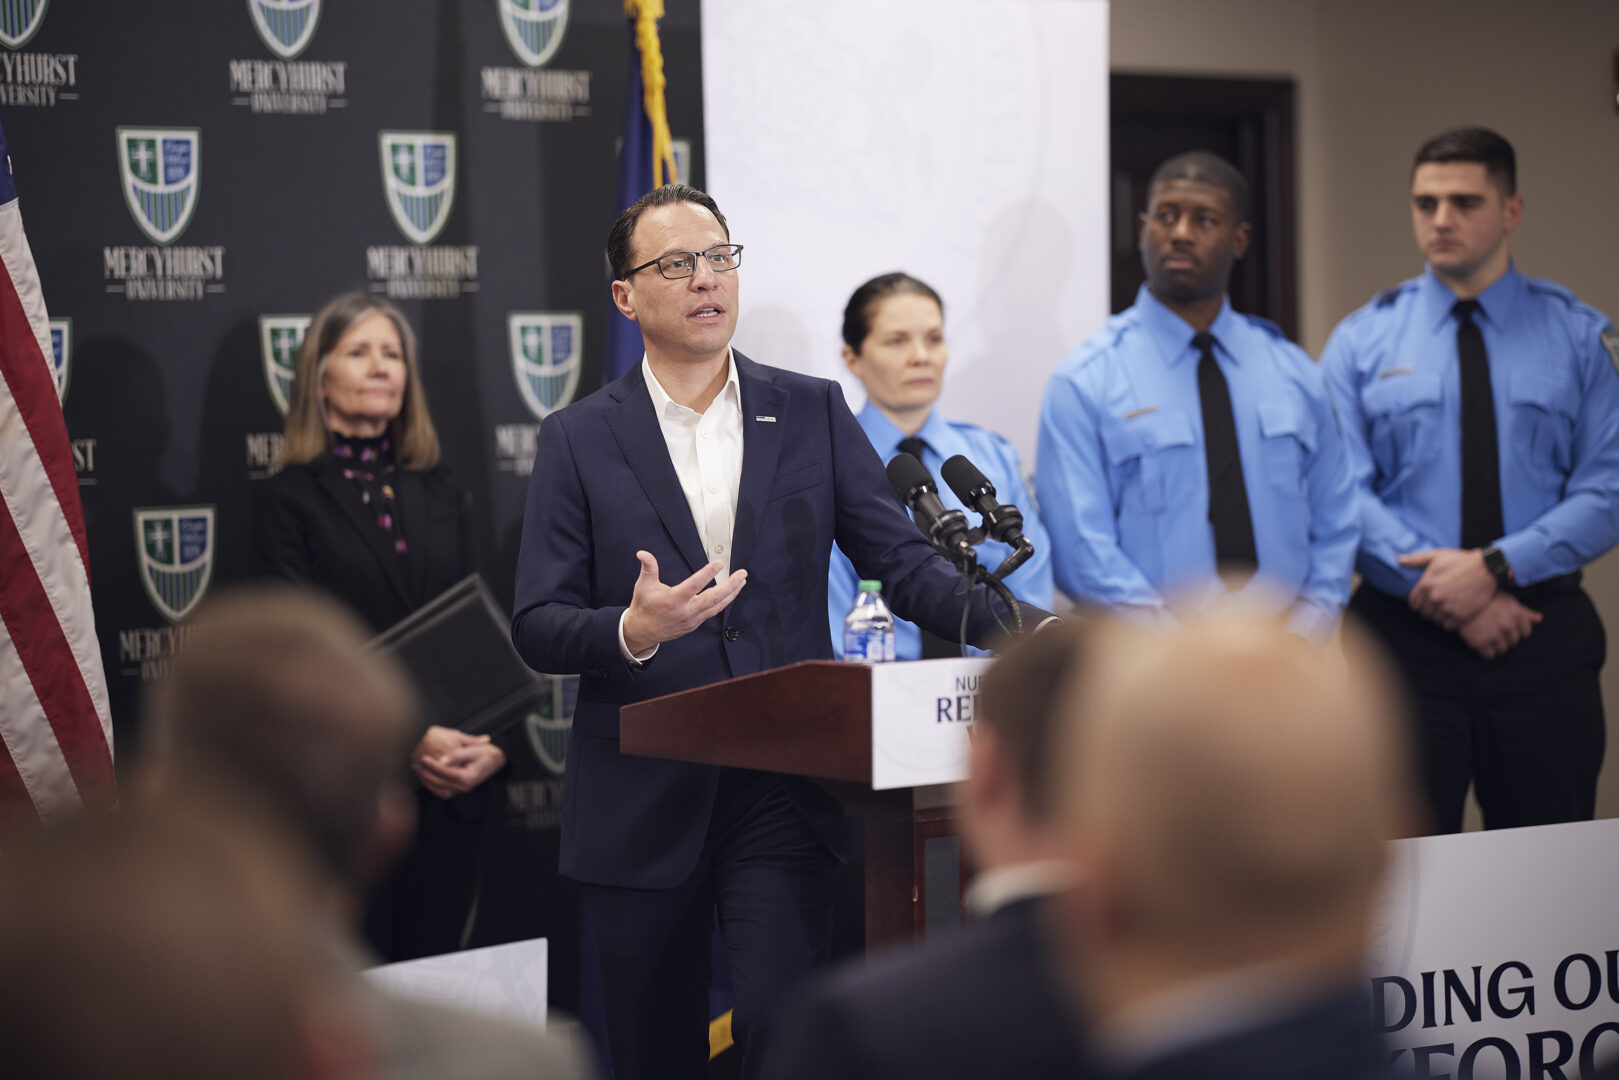 Pa. Governor Josh Shapiro speaks at a press conference after meetng with cadets at the Mercyhurst Municipal Police Academy in Erie on March 23, 2023.